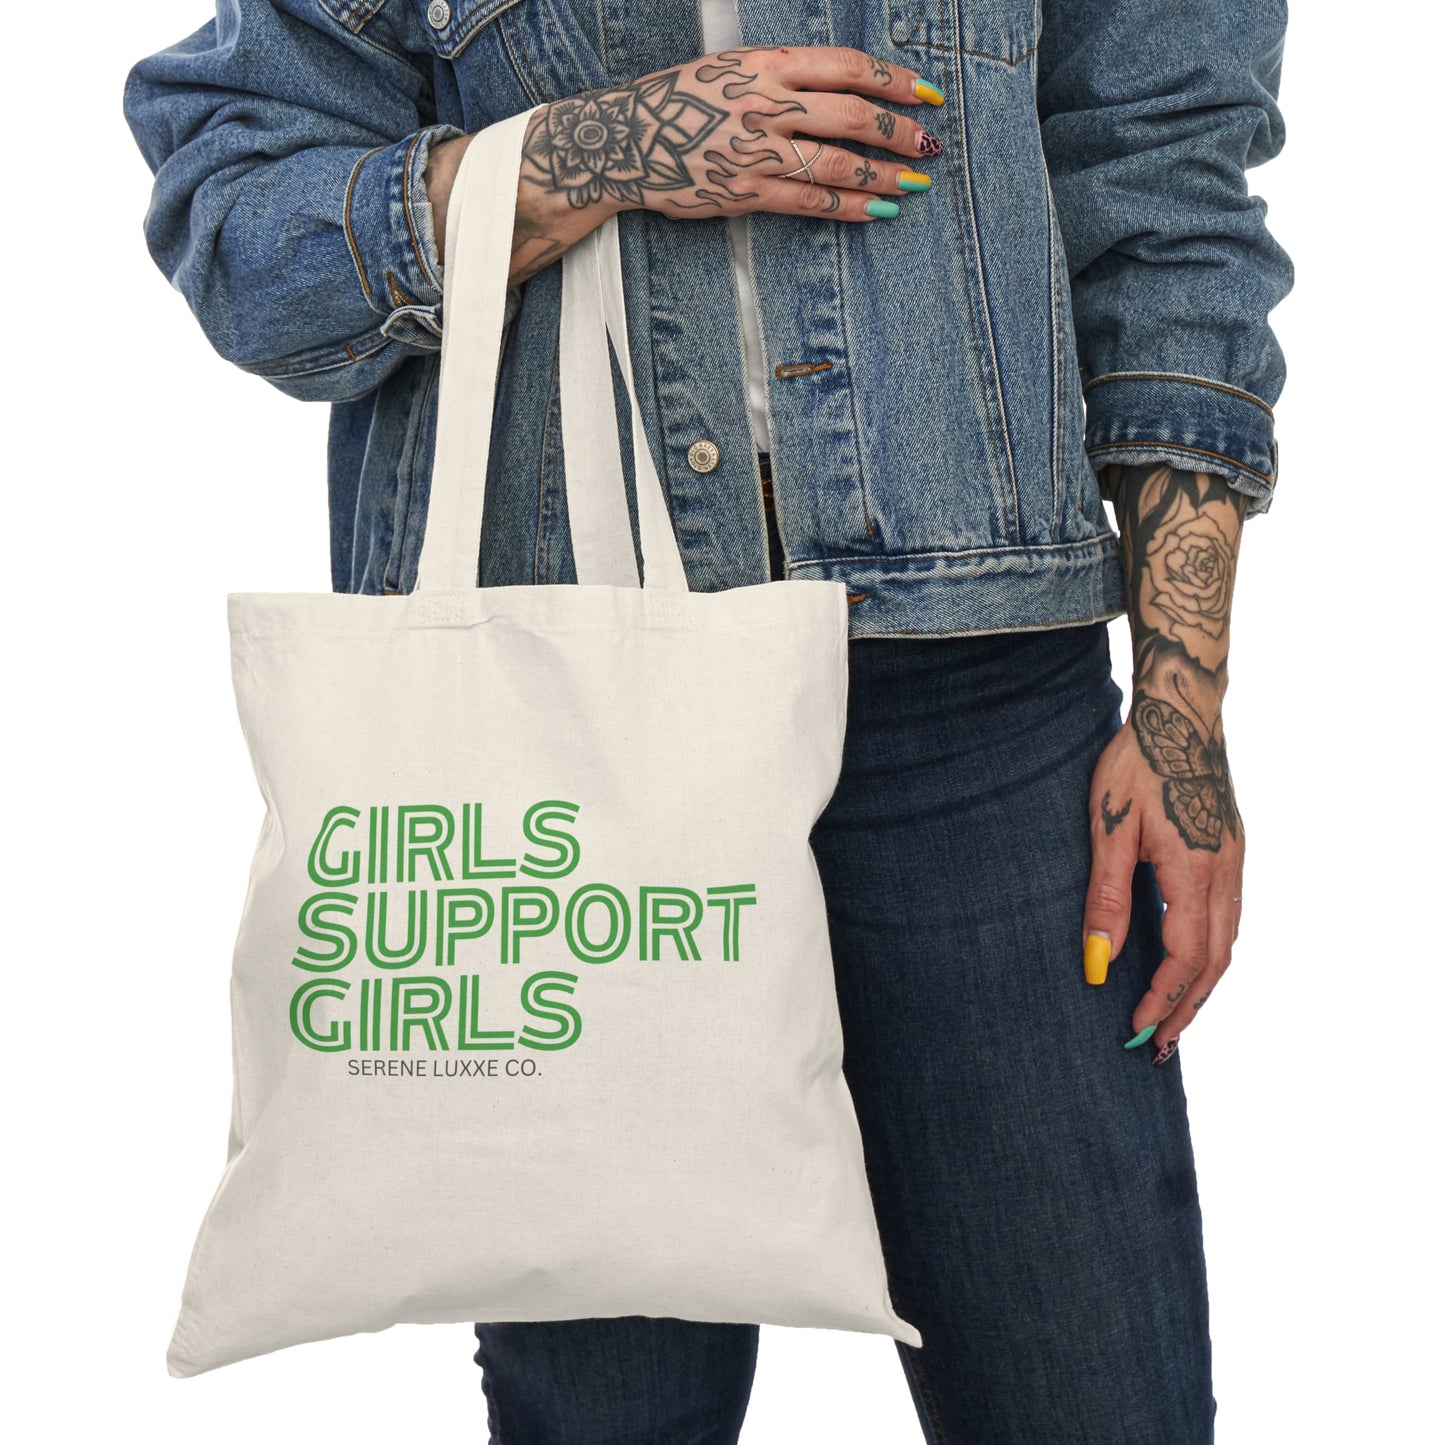 "Girls Support Girls" Tote Bag